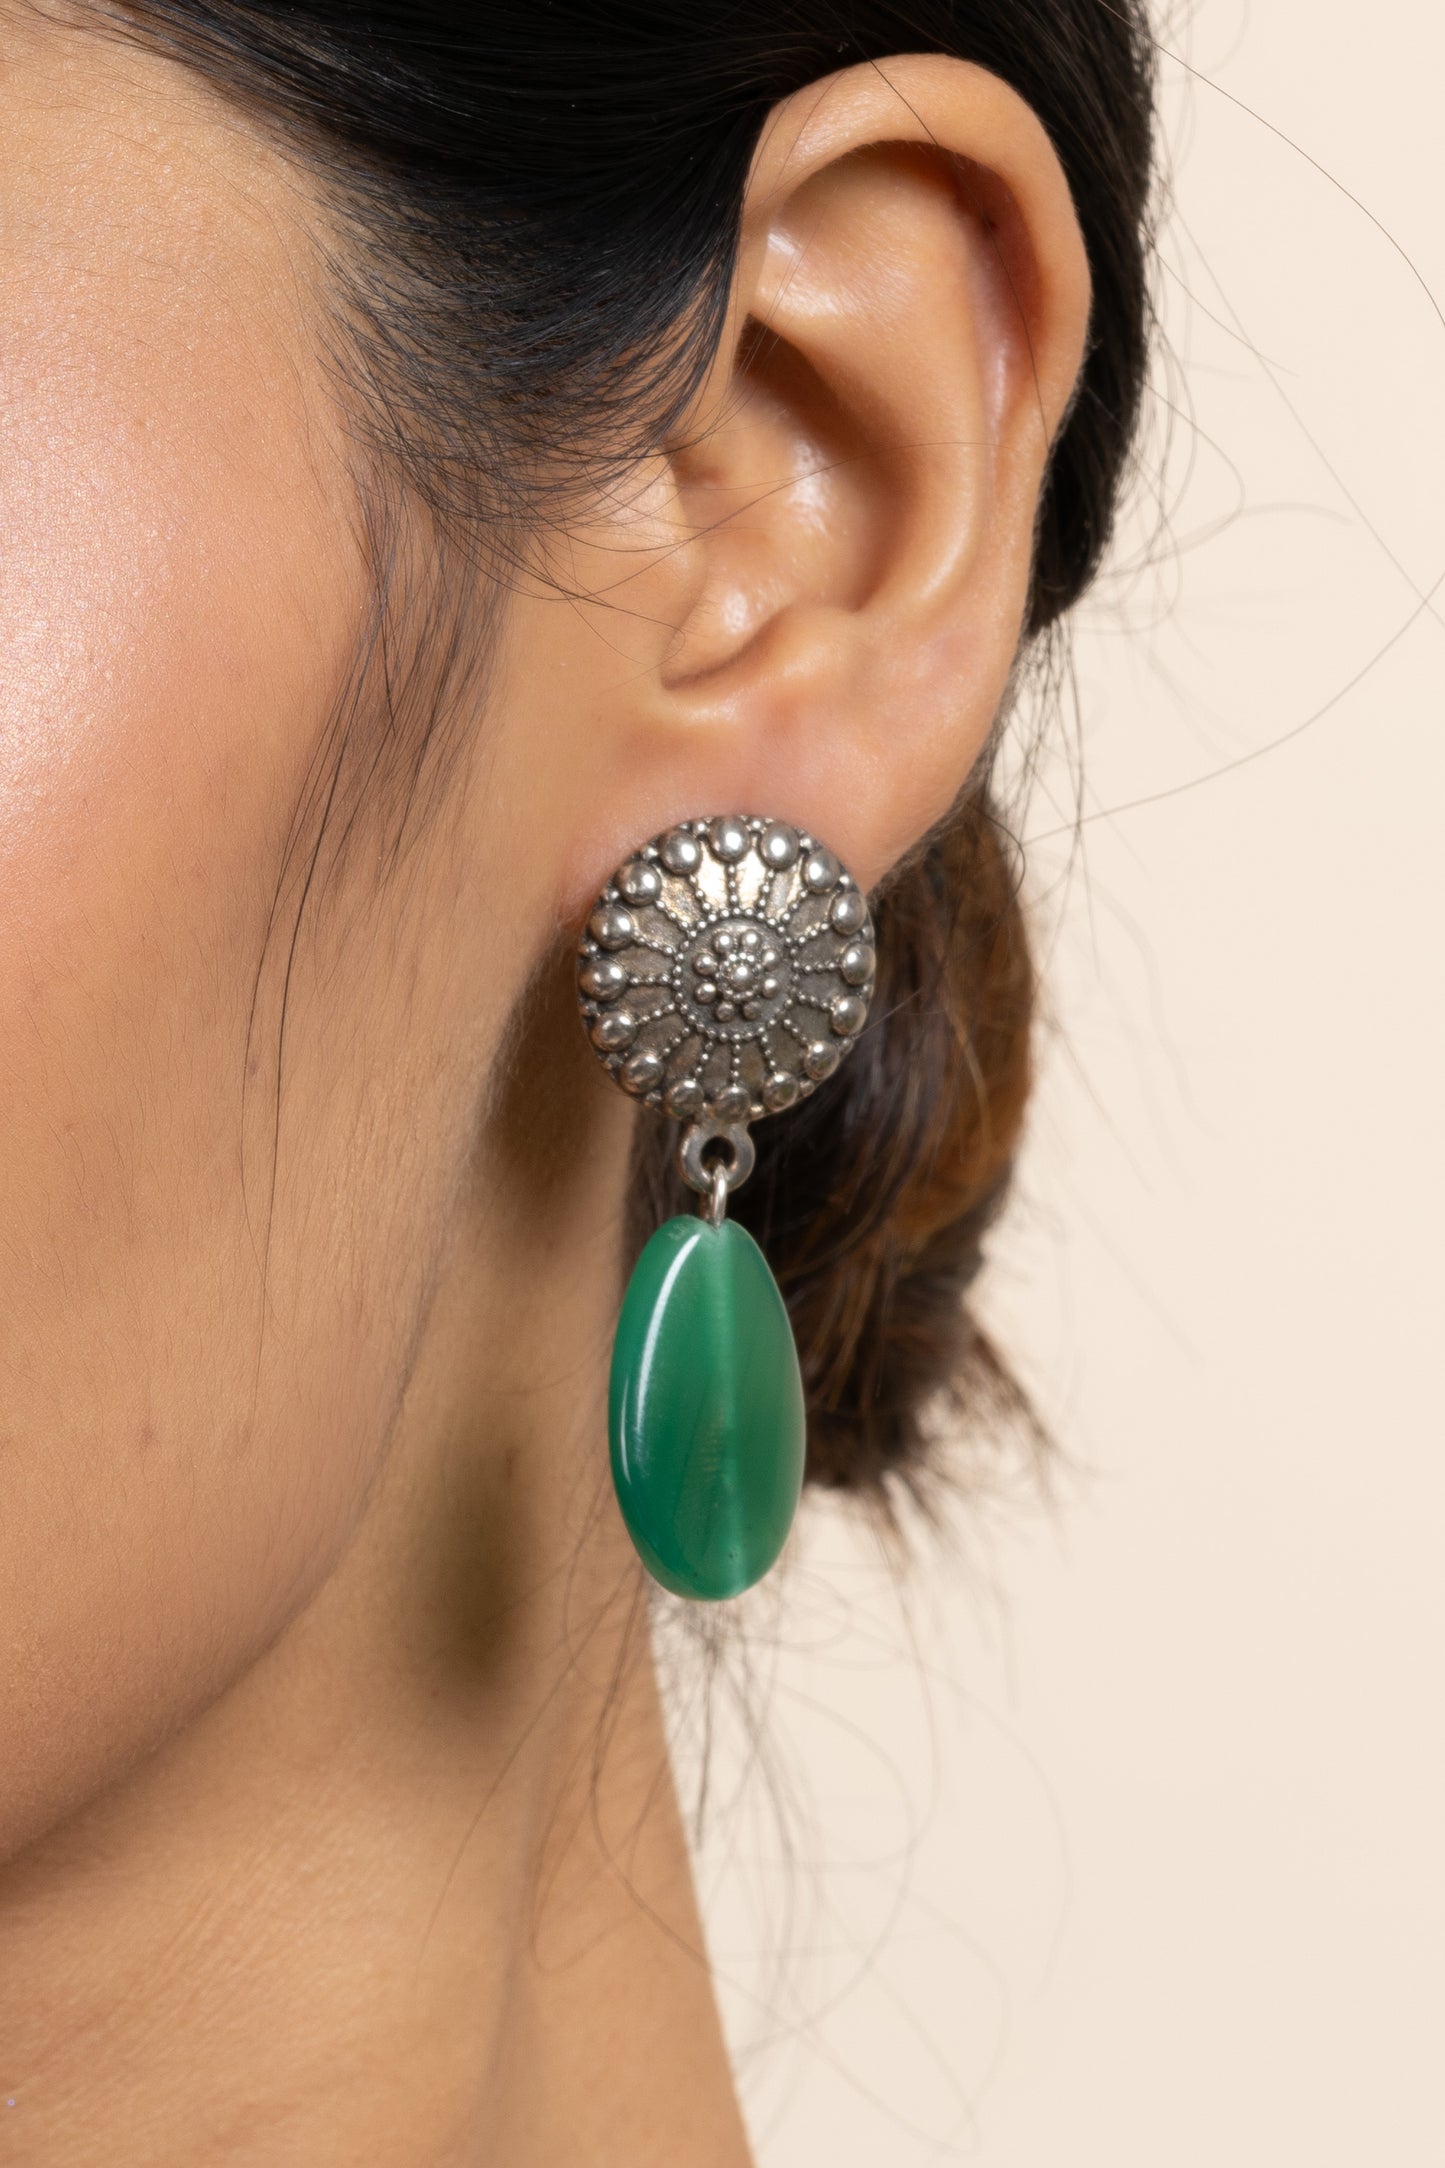 German Silver Round Stud with Green Semi Precious Agate Stone Earring